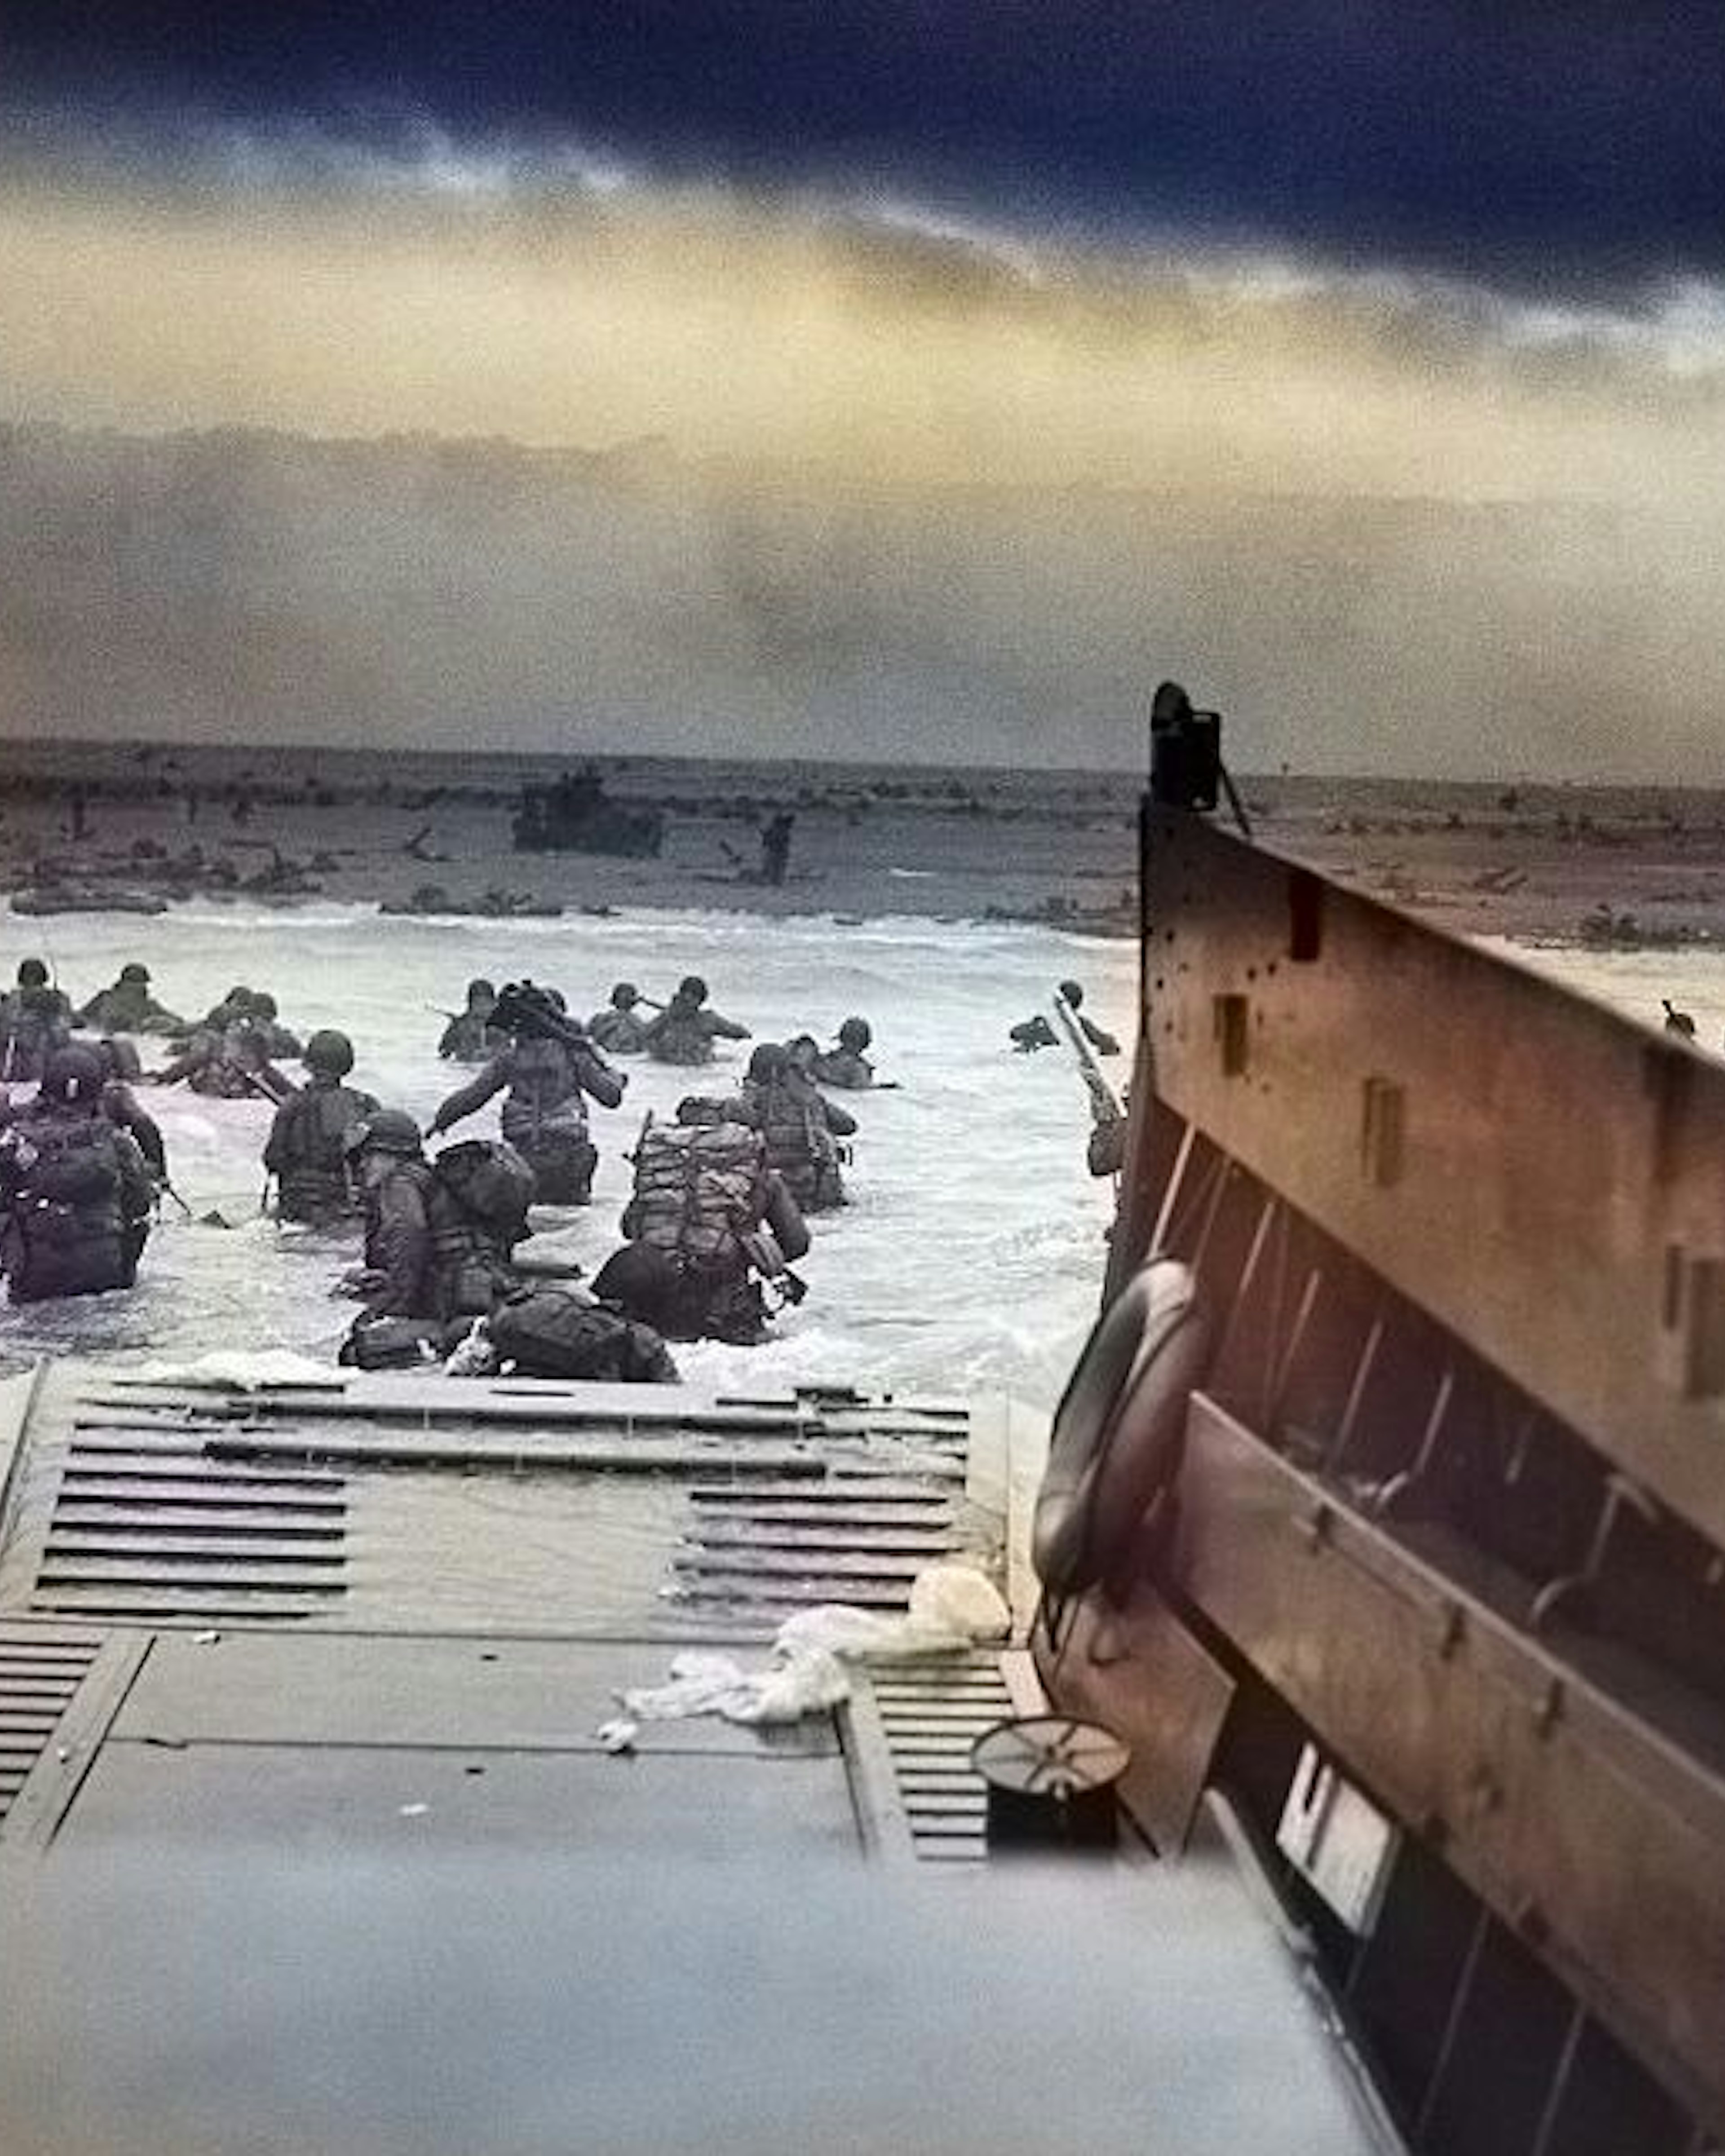 Digitally colorized image of "Into the Jaws of Death", a photograph by Robert F Sargent of the United States Army First Infantry Division disembarking from an LCVP (landing craft) onto Omaha Beach during the Normandy Landings on D Day during World War 2, June 6, 1944. (Photo via Smith Collection/Gado/Getty Images).